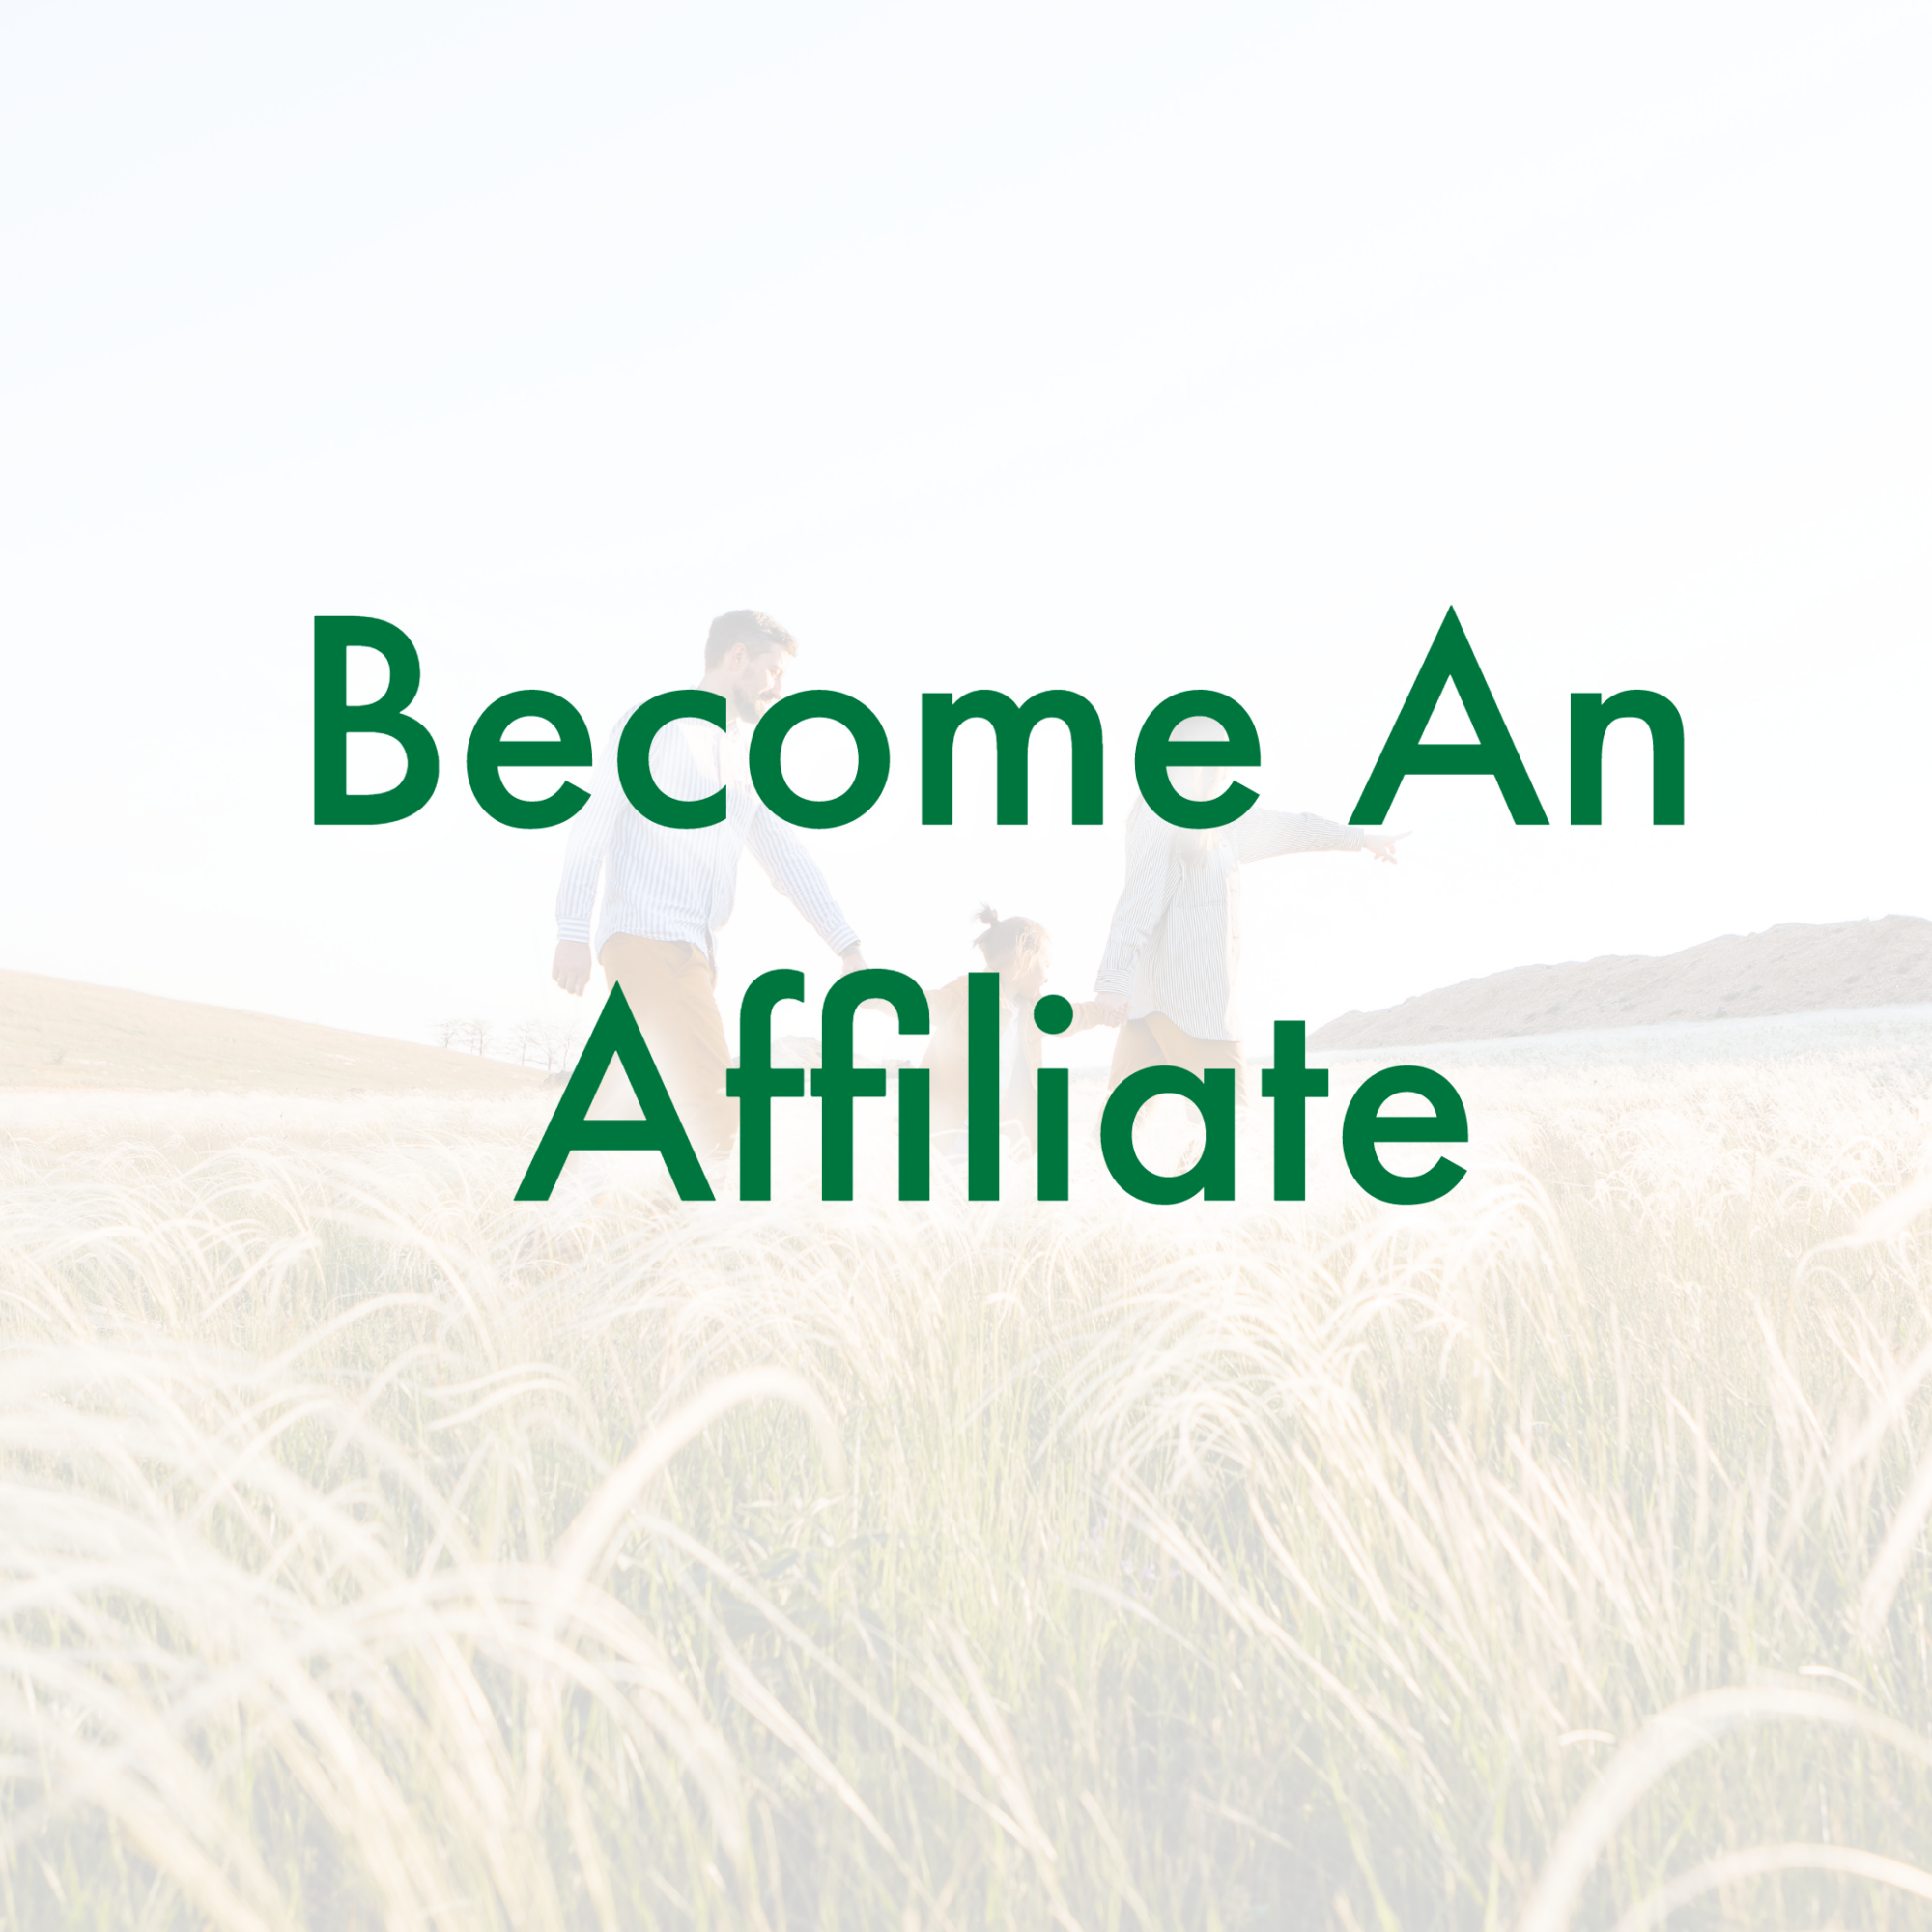 become an Affiliate